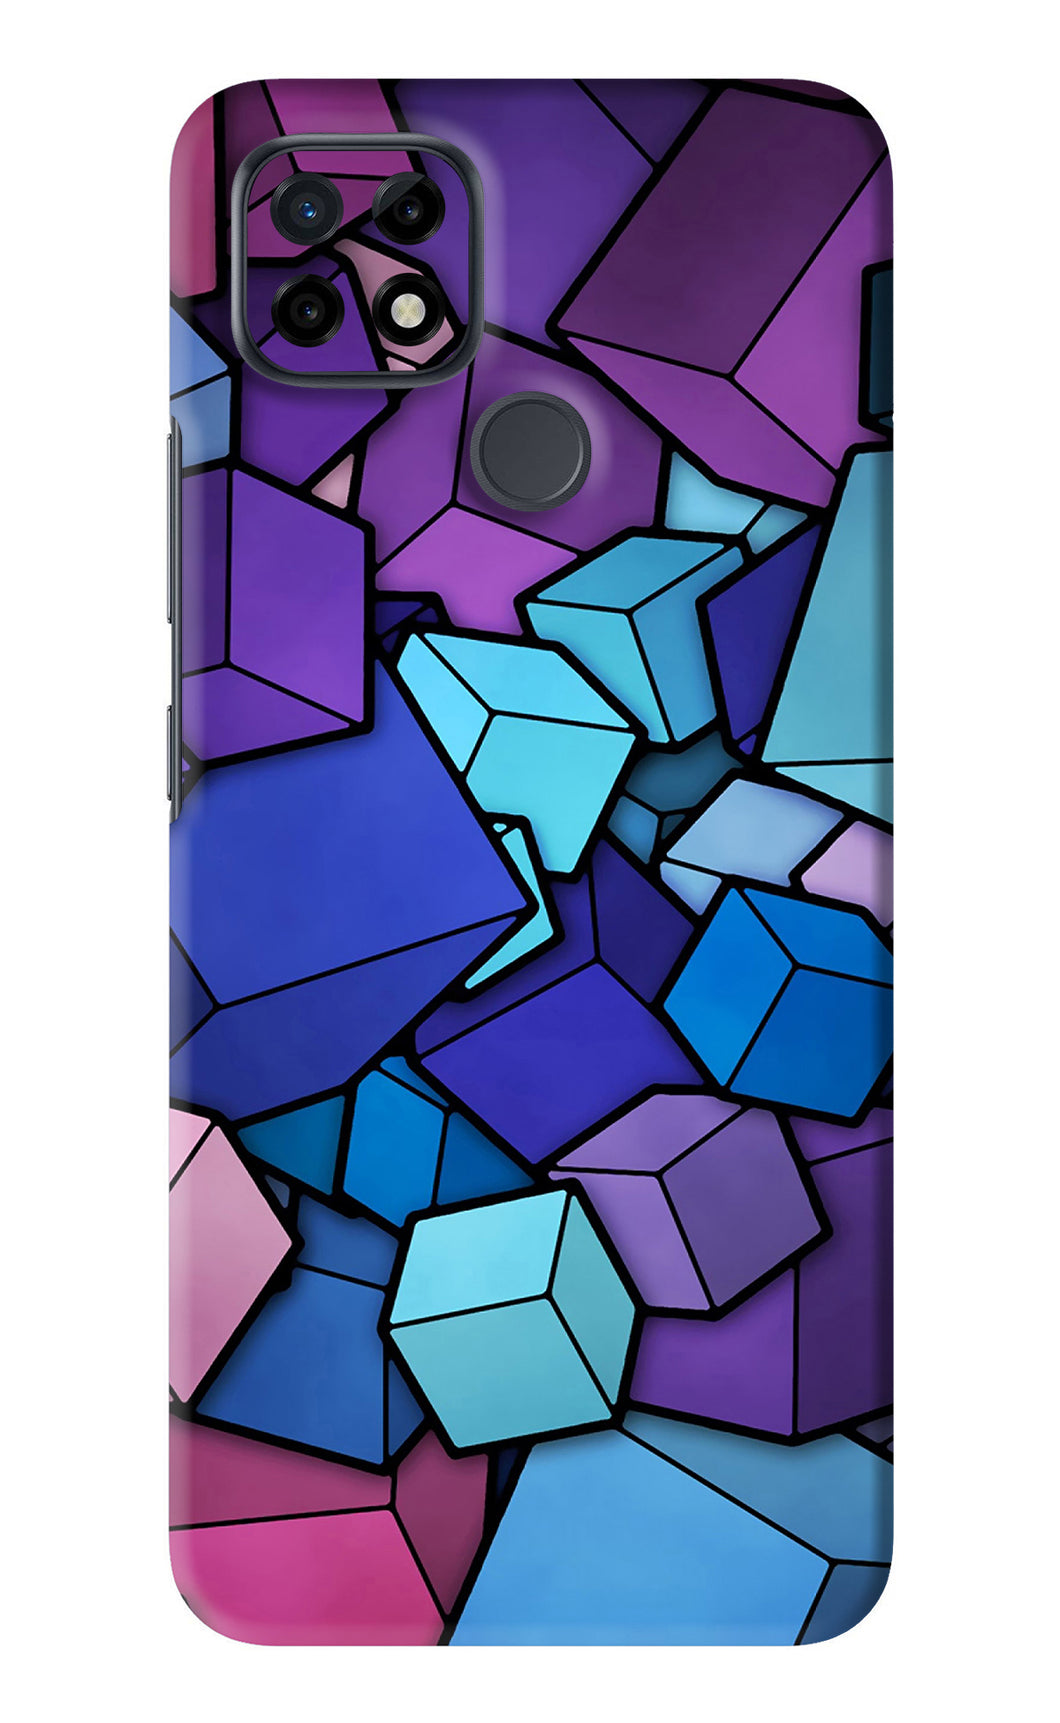 Cubic Abstract Realme C21 Back Skin Wrap